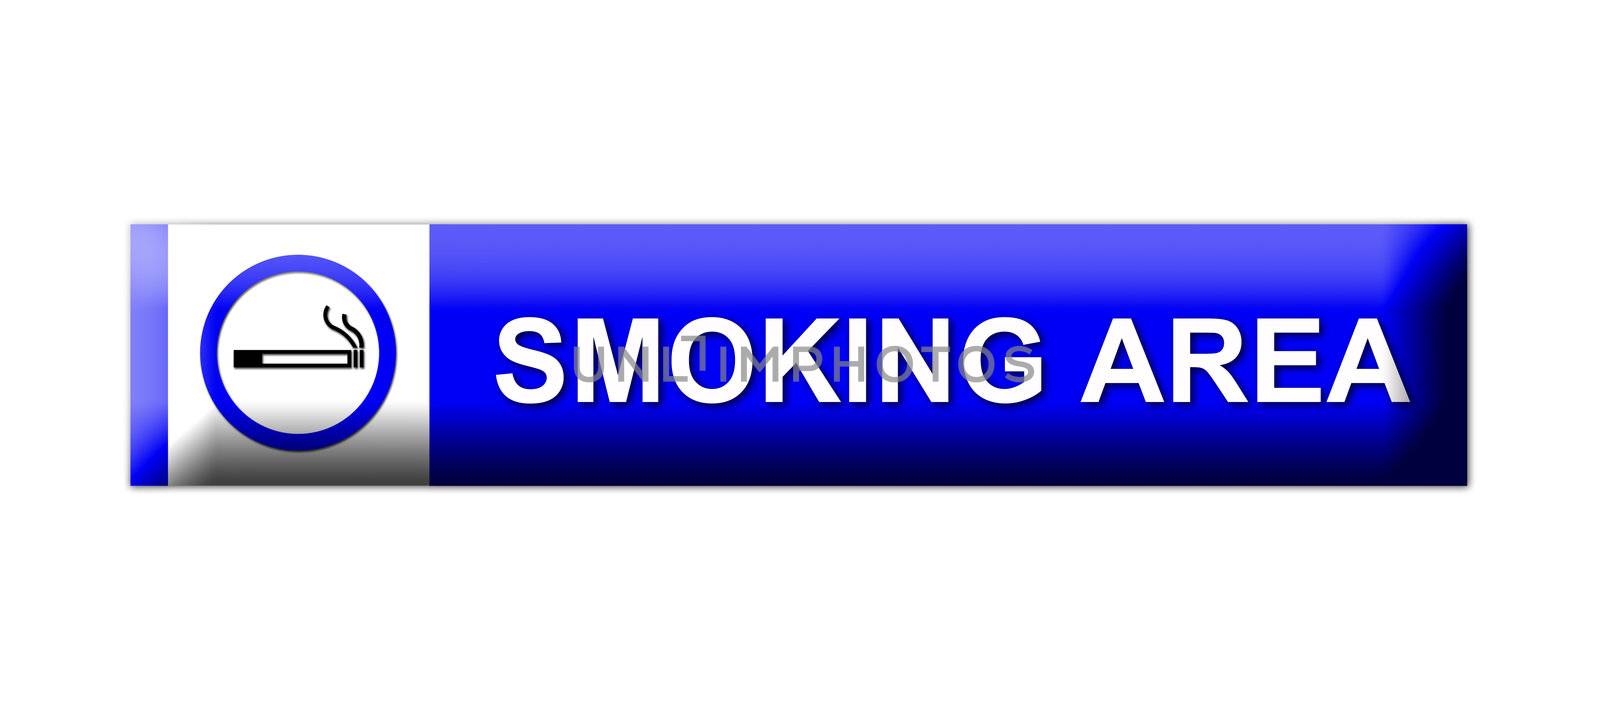 3D smoking area sign on white by geargodz